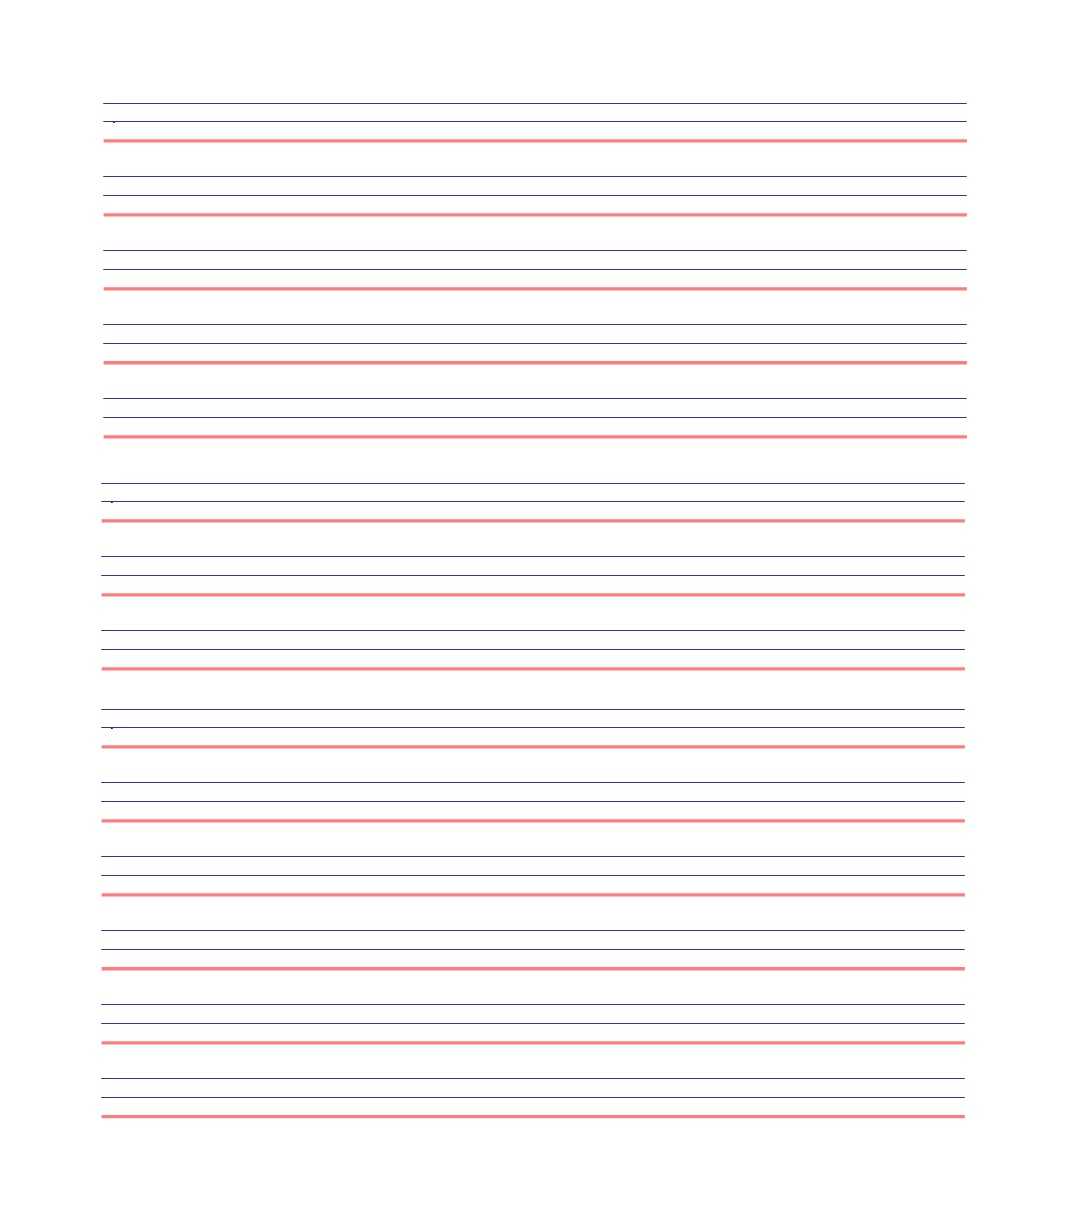 Microsoft Word Lined Paper Template - Dalep.midnightpig.co For College Ruled Lined Paper Template Word 2007